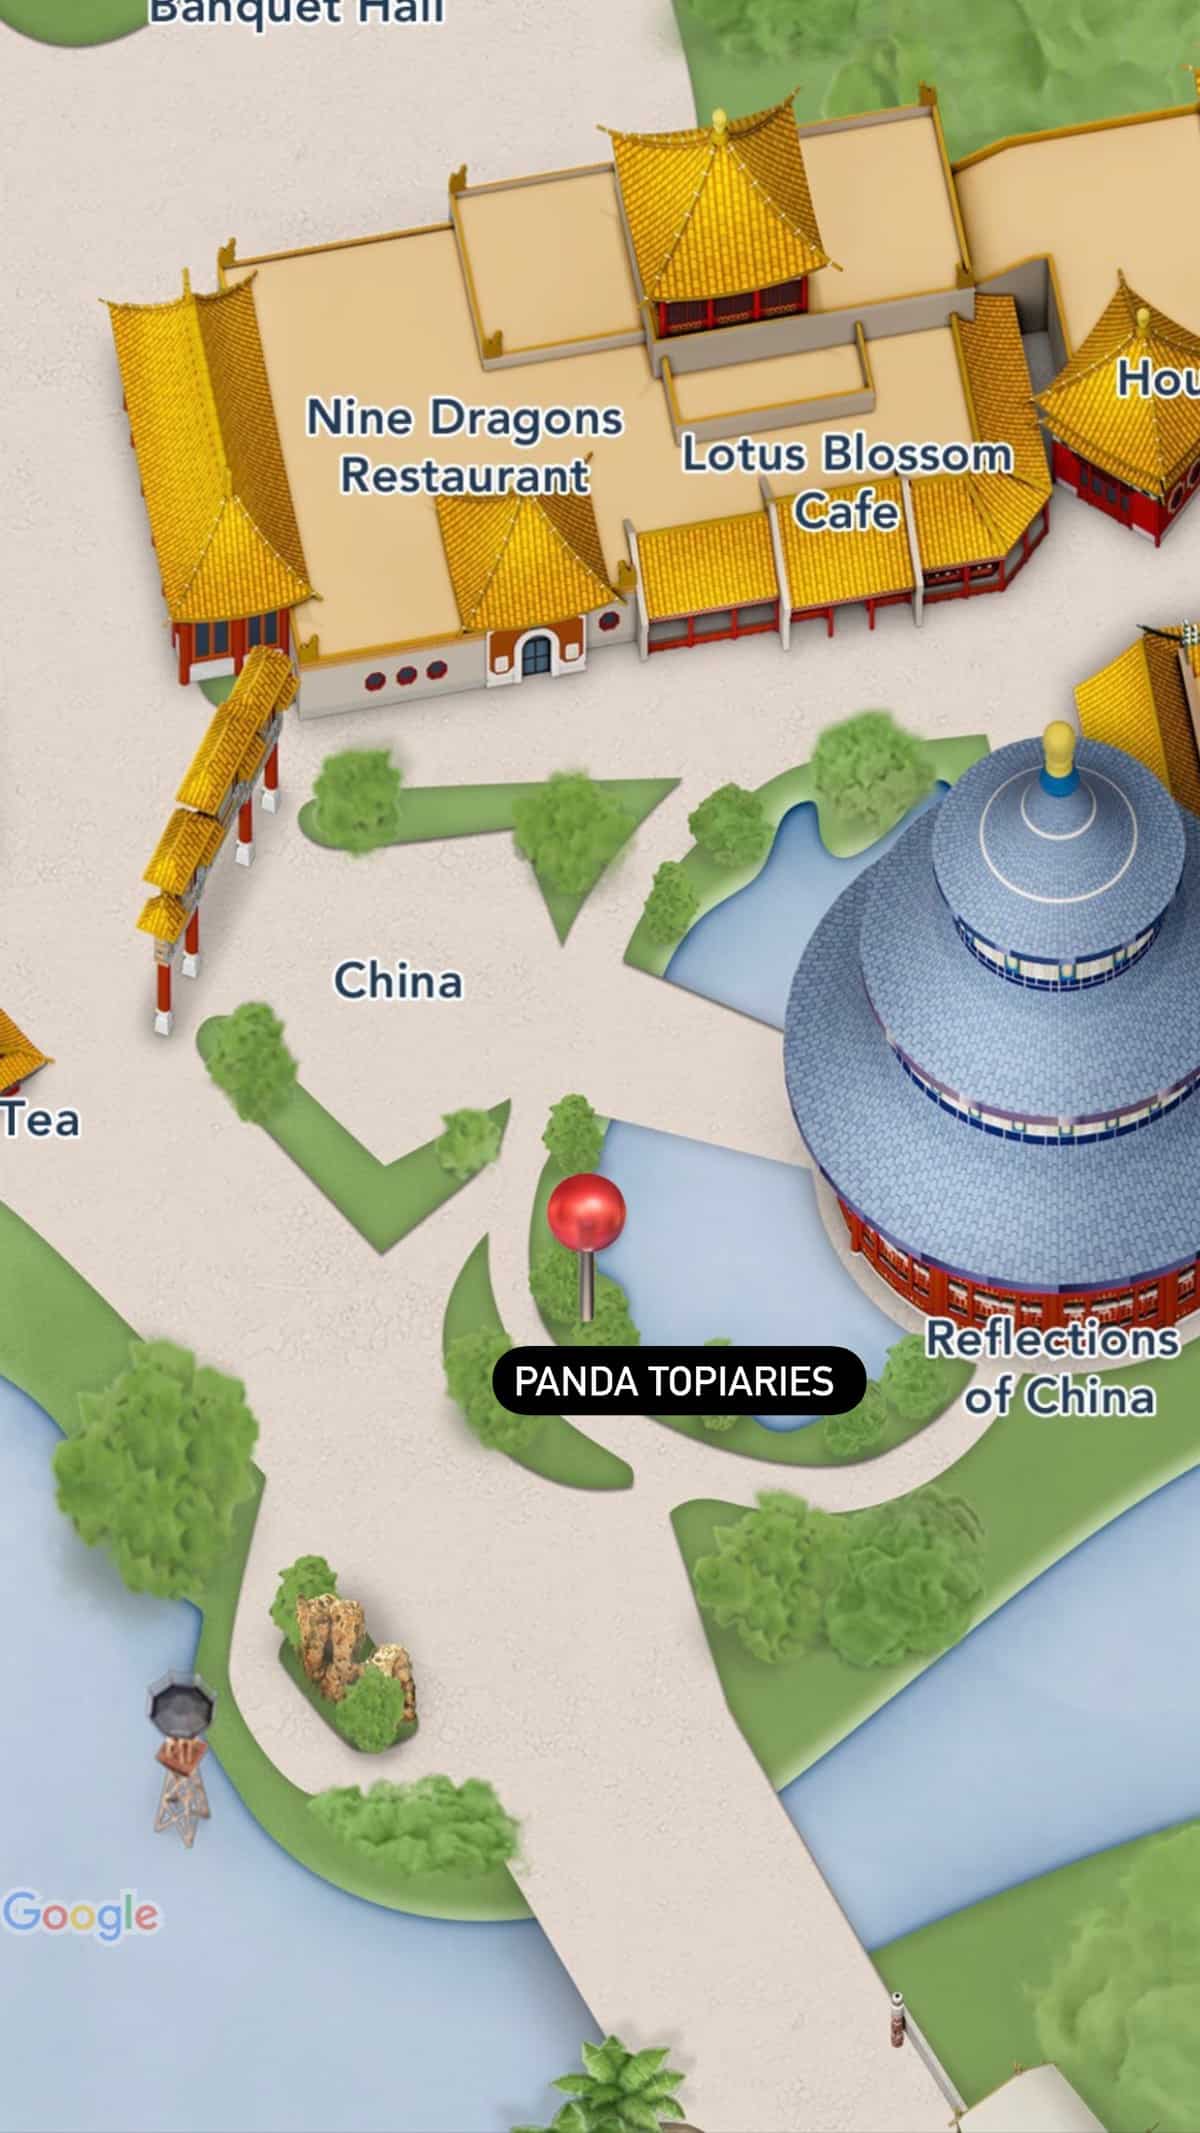 Epcot 2022 Flower and Garden Festival - panda topiaries map